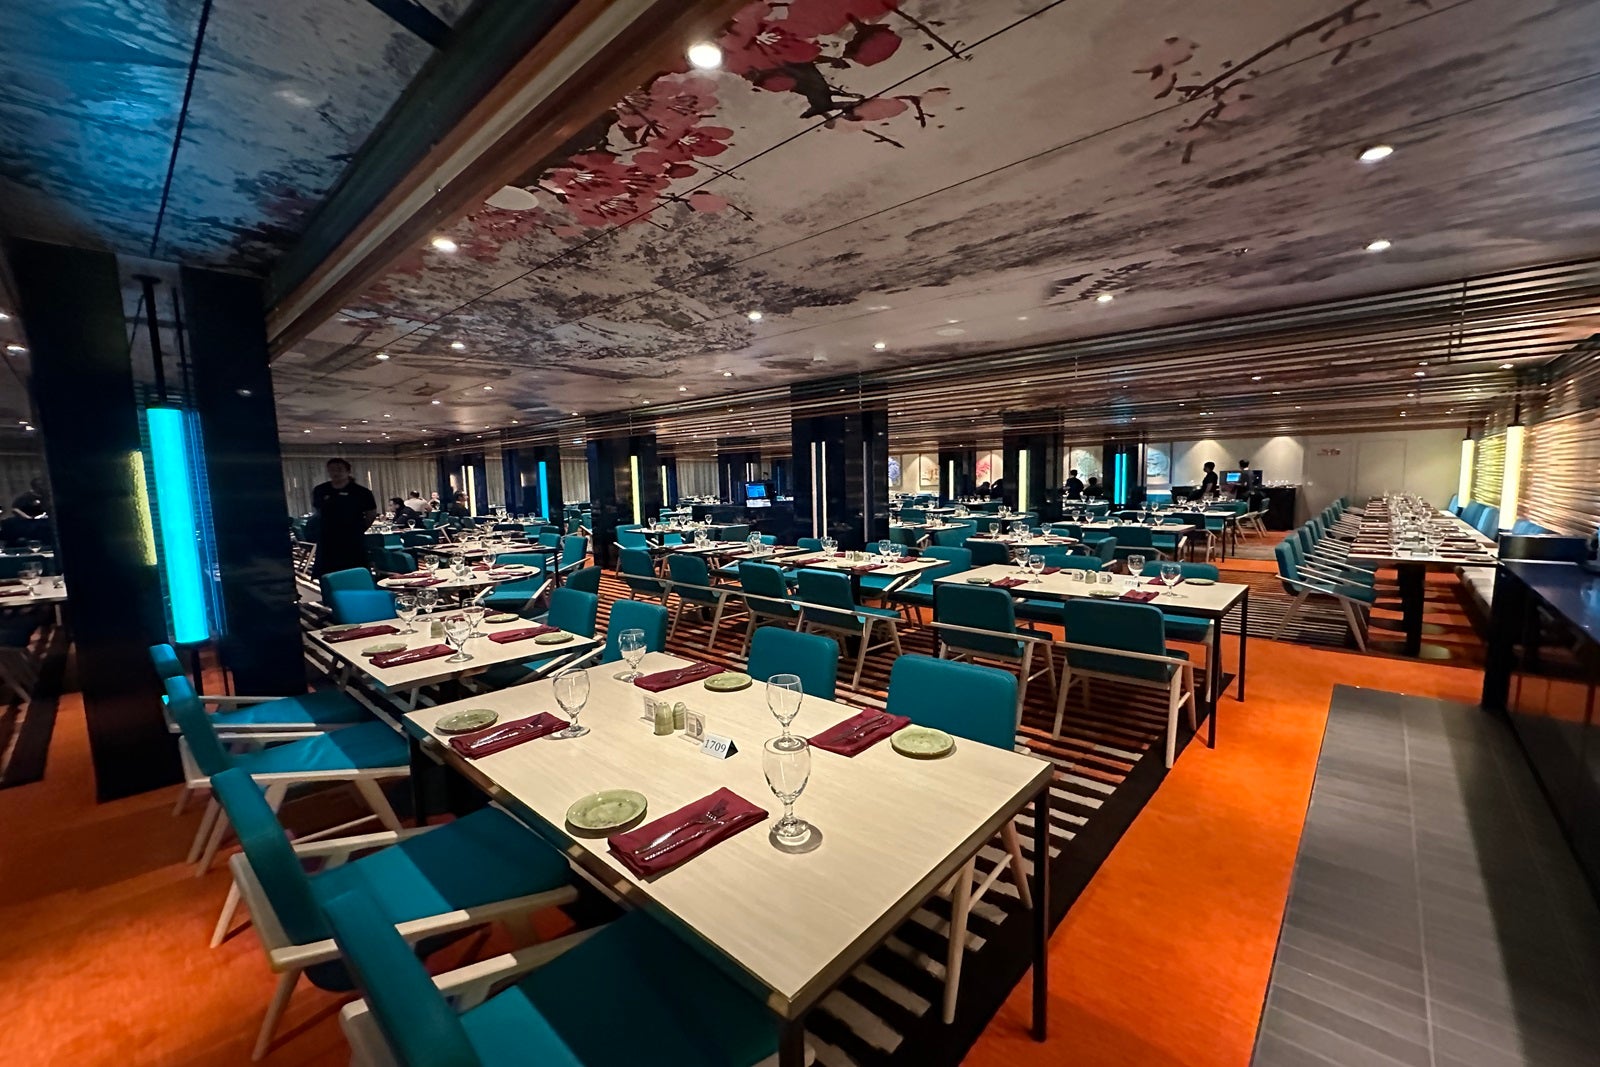 A restaurant with long, rectangular tables surrounded by teal-colored seats on orange carpeting